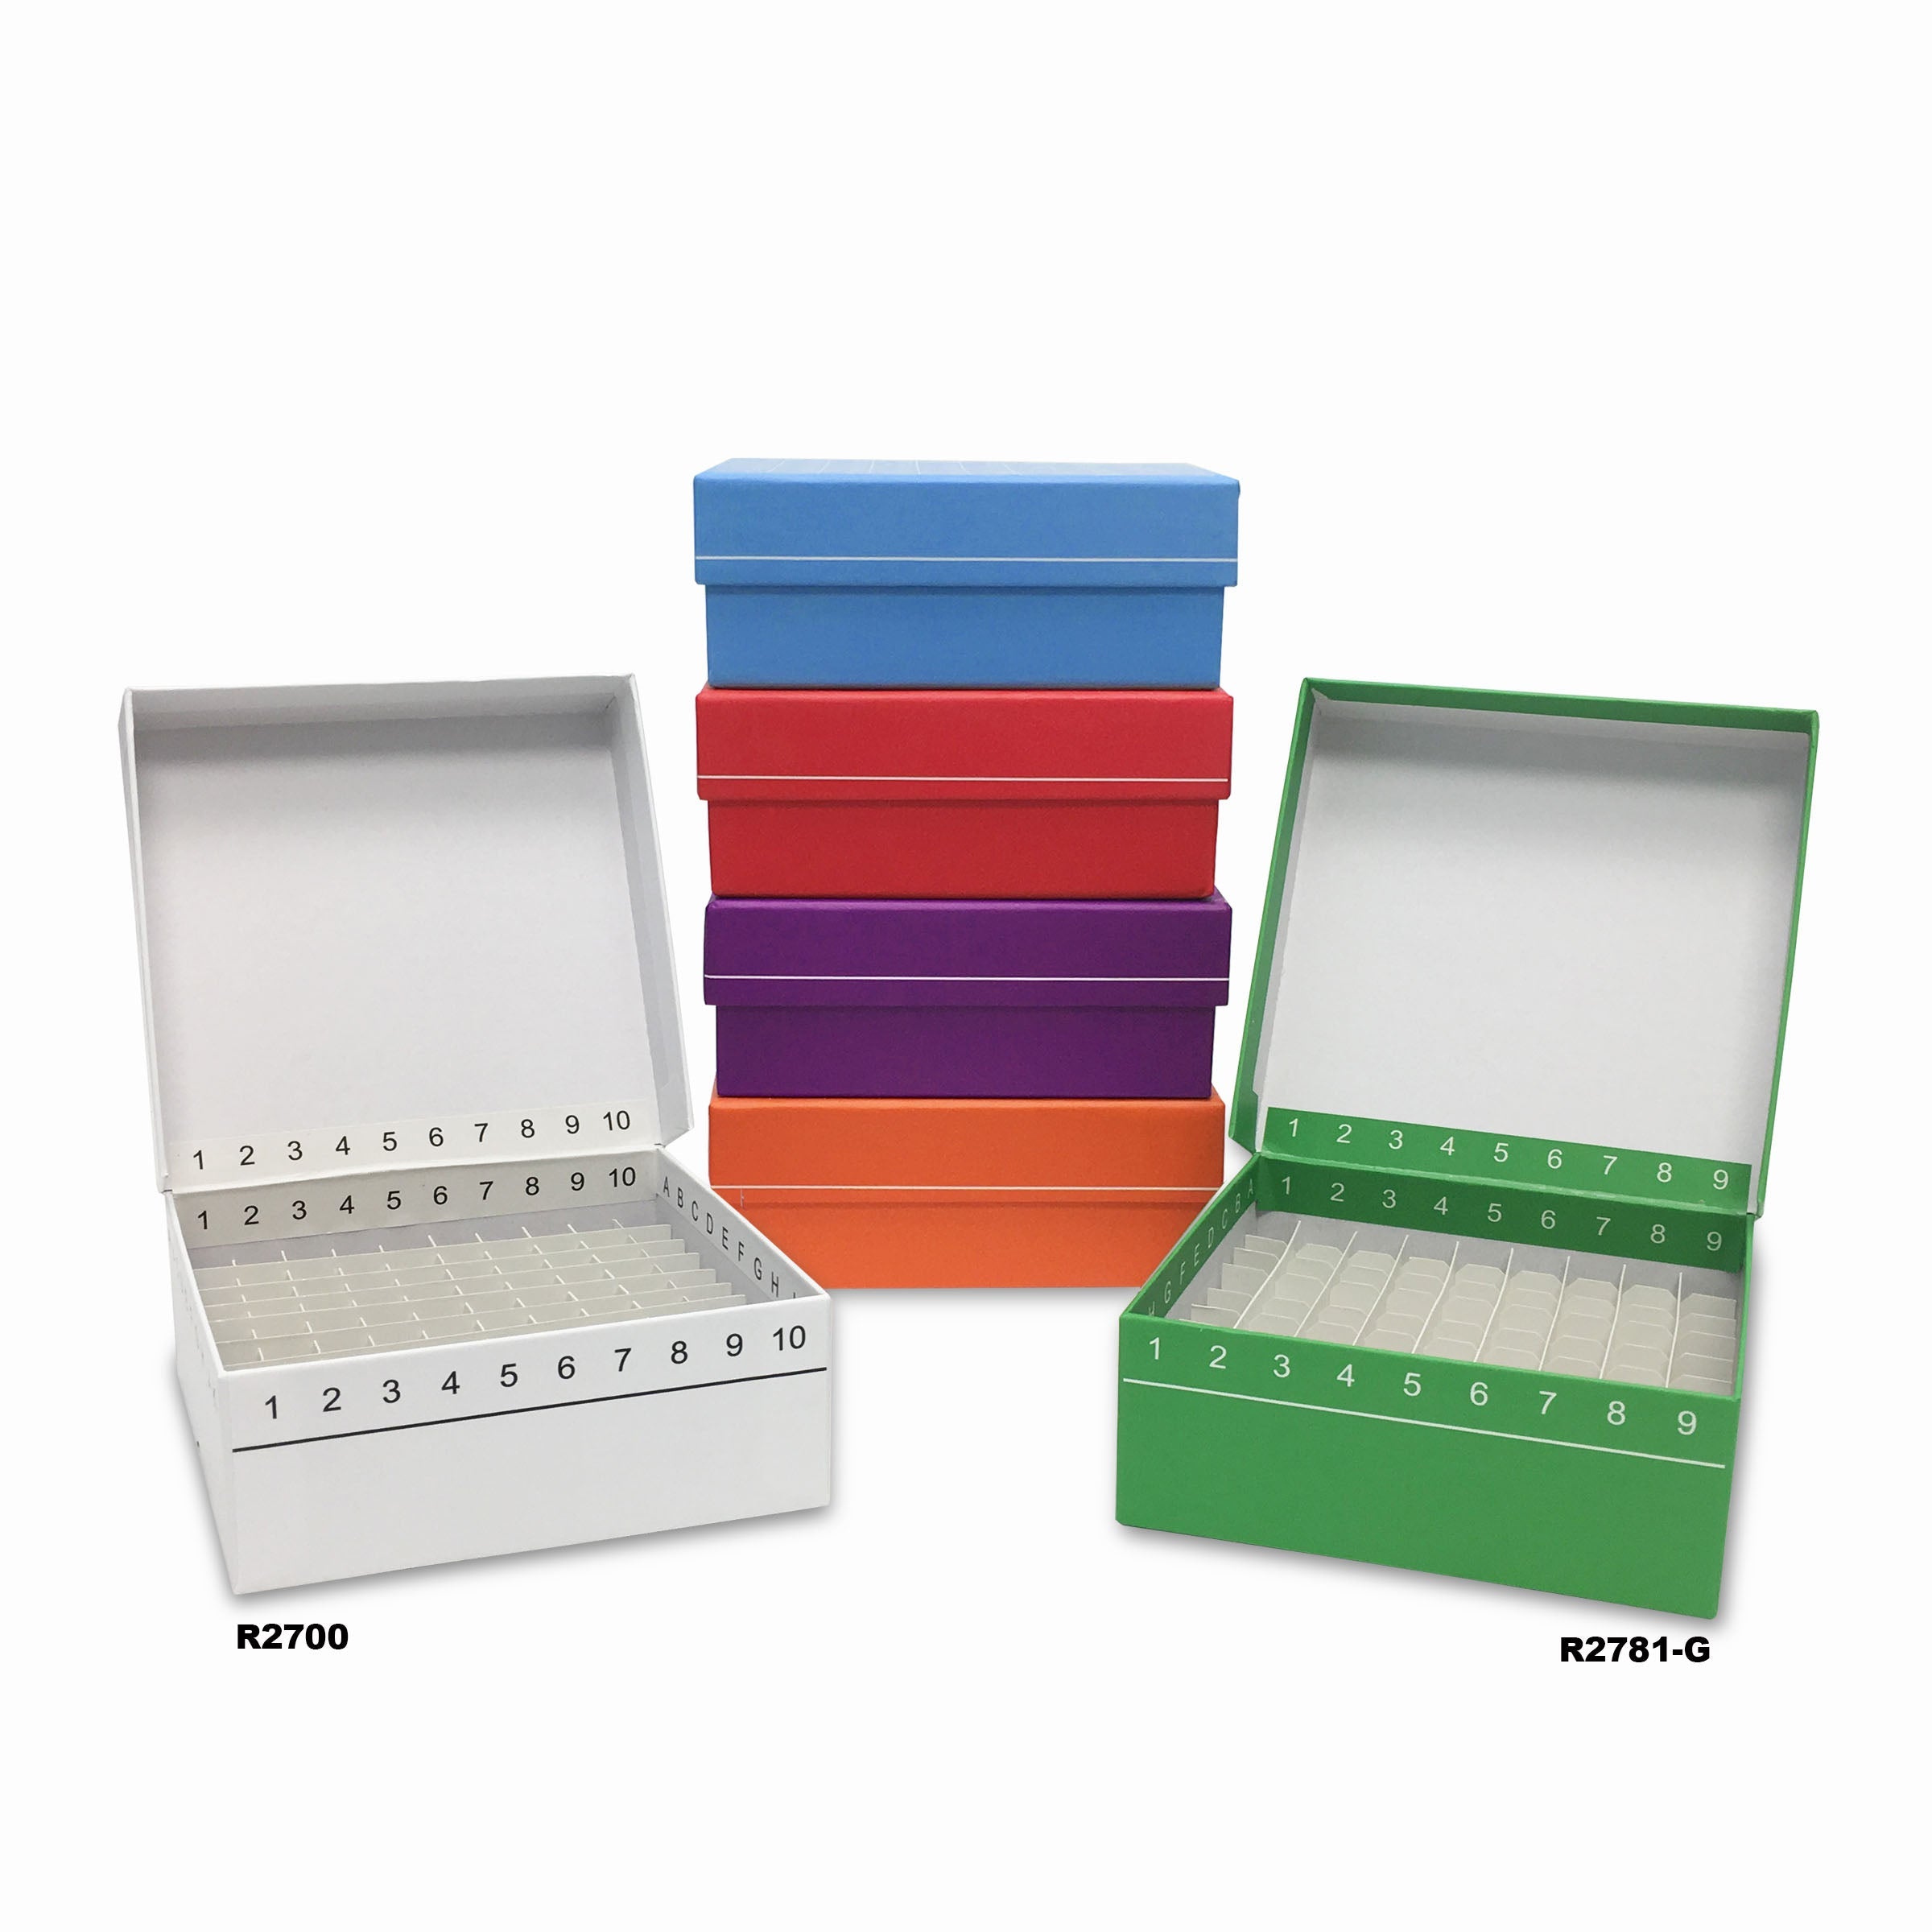 MTC Bio R2781-O, Fliptop Carboard Freezer Box with Attached Hinged Lid, 81-Place, Orange, 5/pk